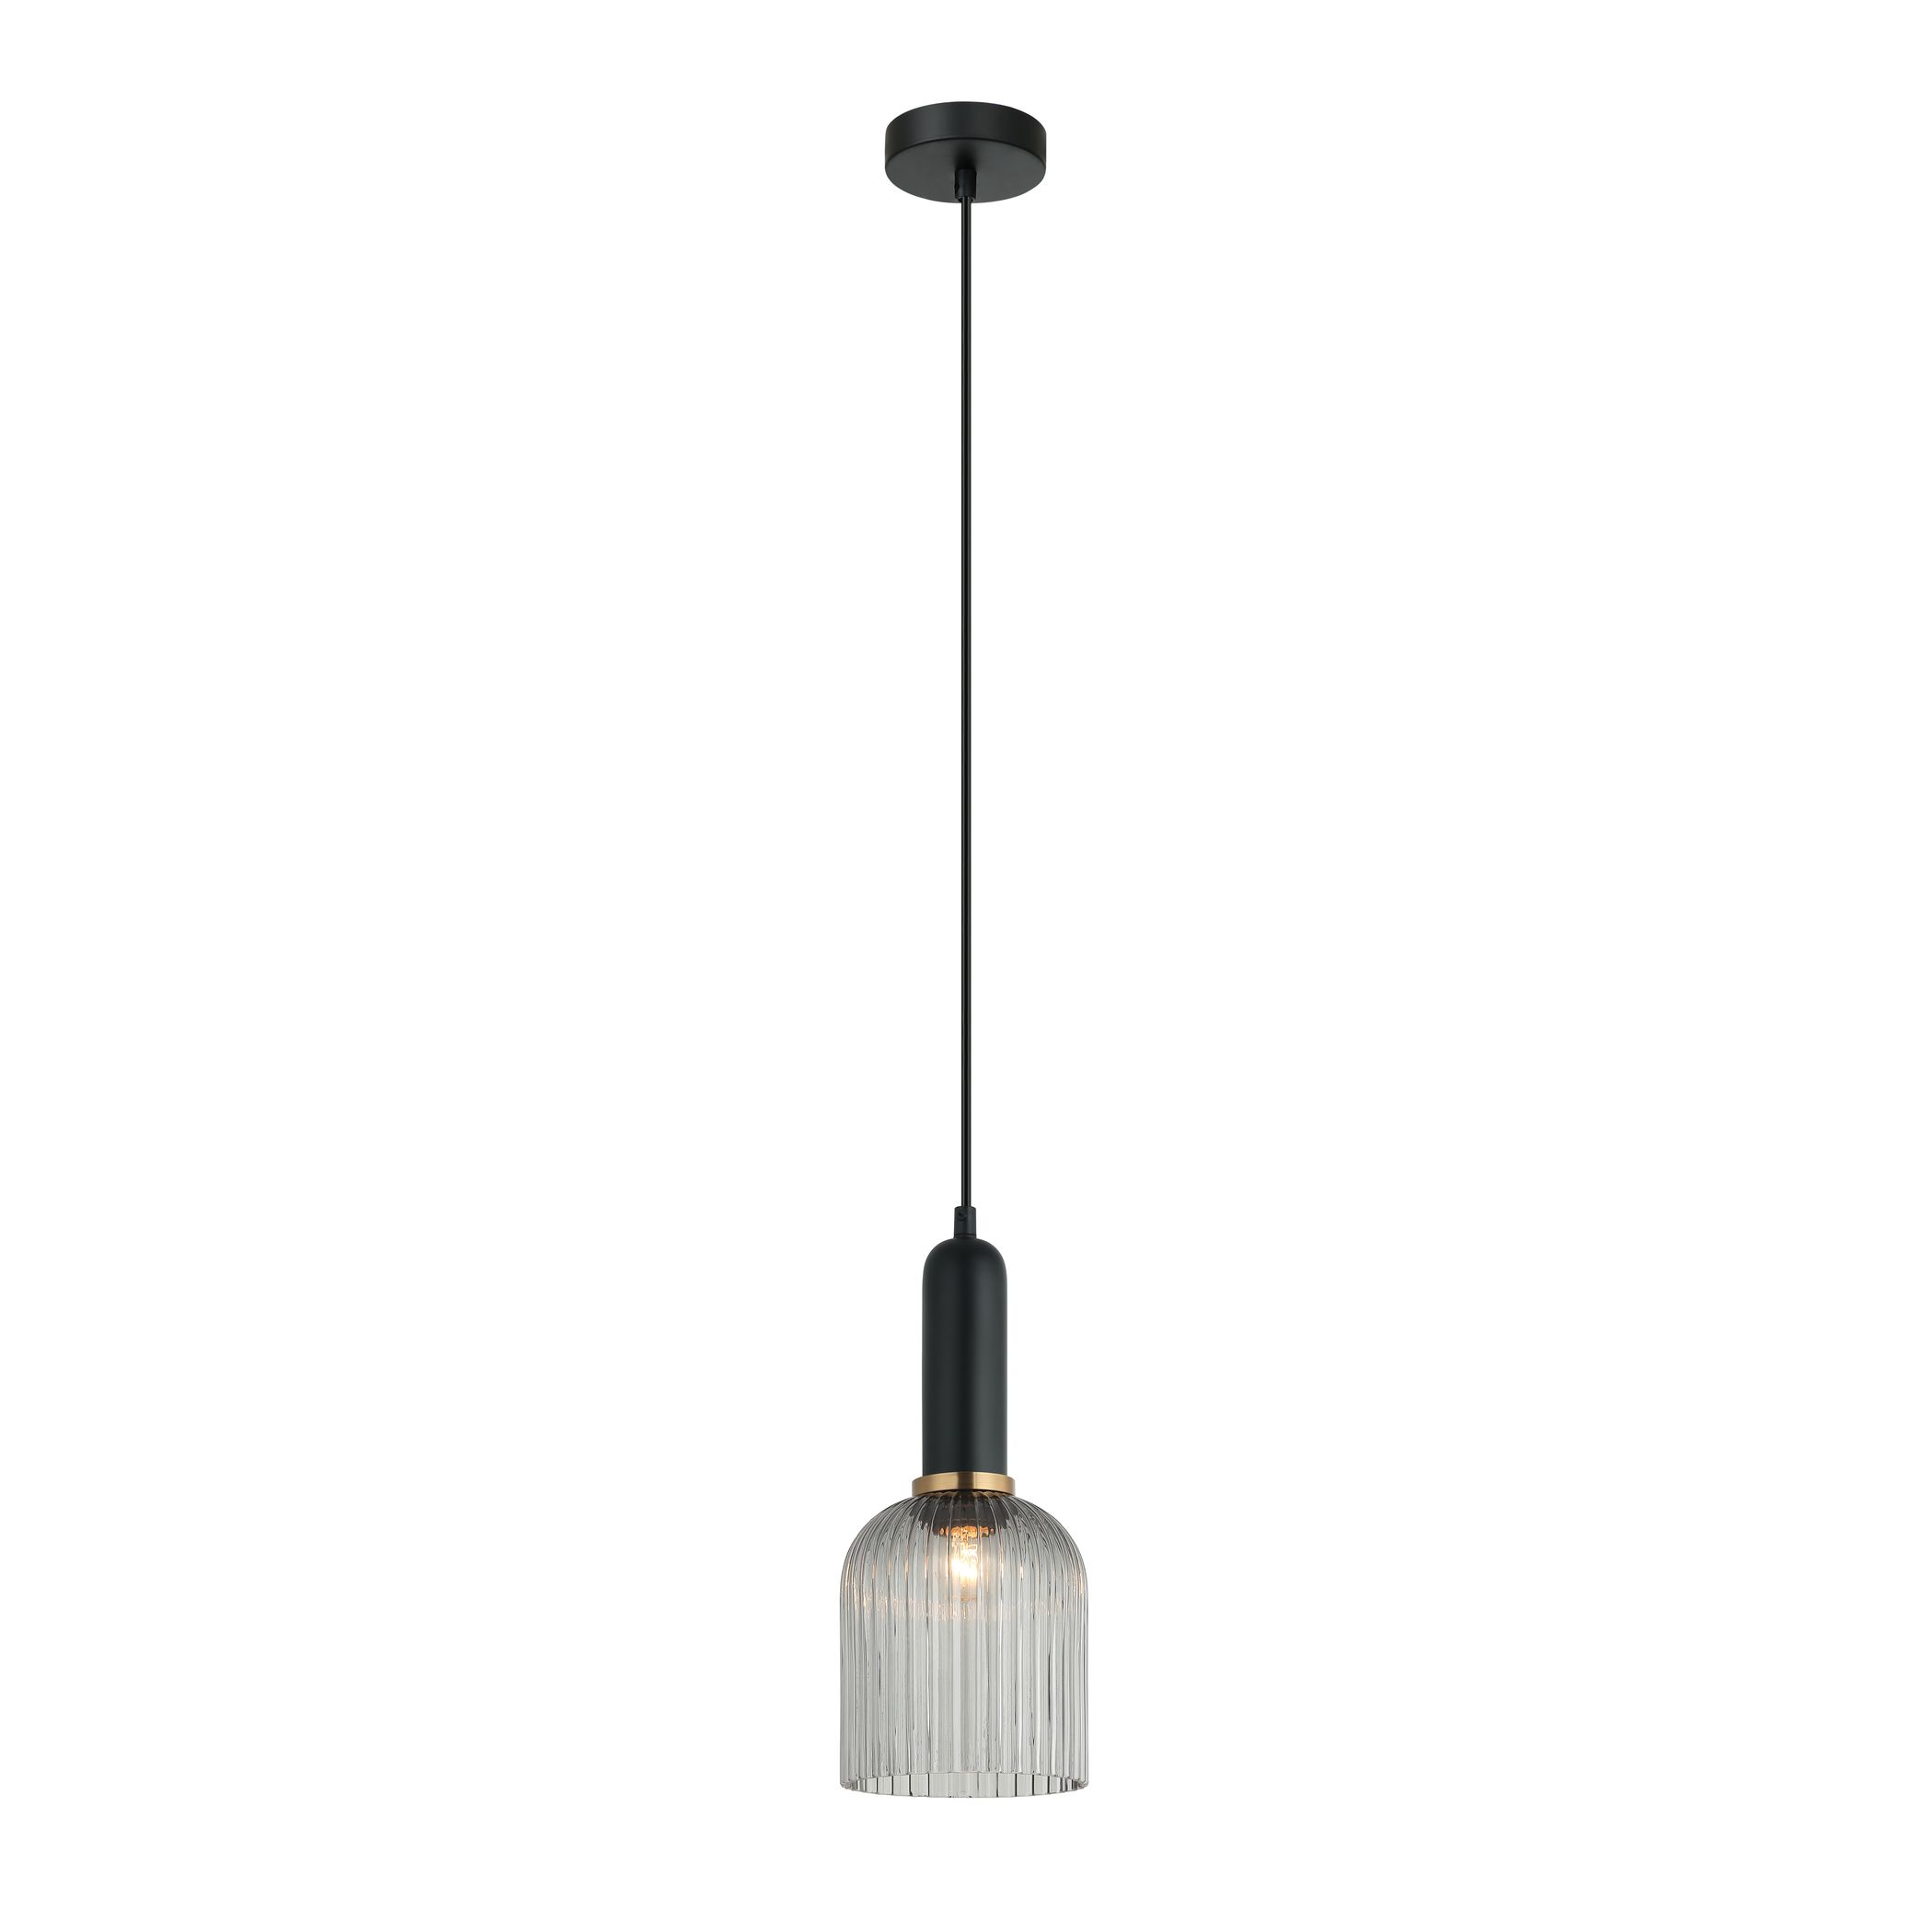 Product image of Murcatto Ellipse Black Mini Pendant with Smoked Glass